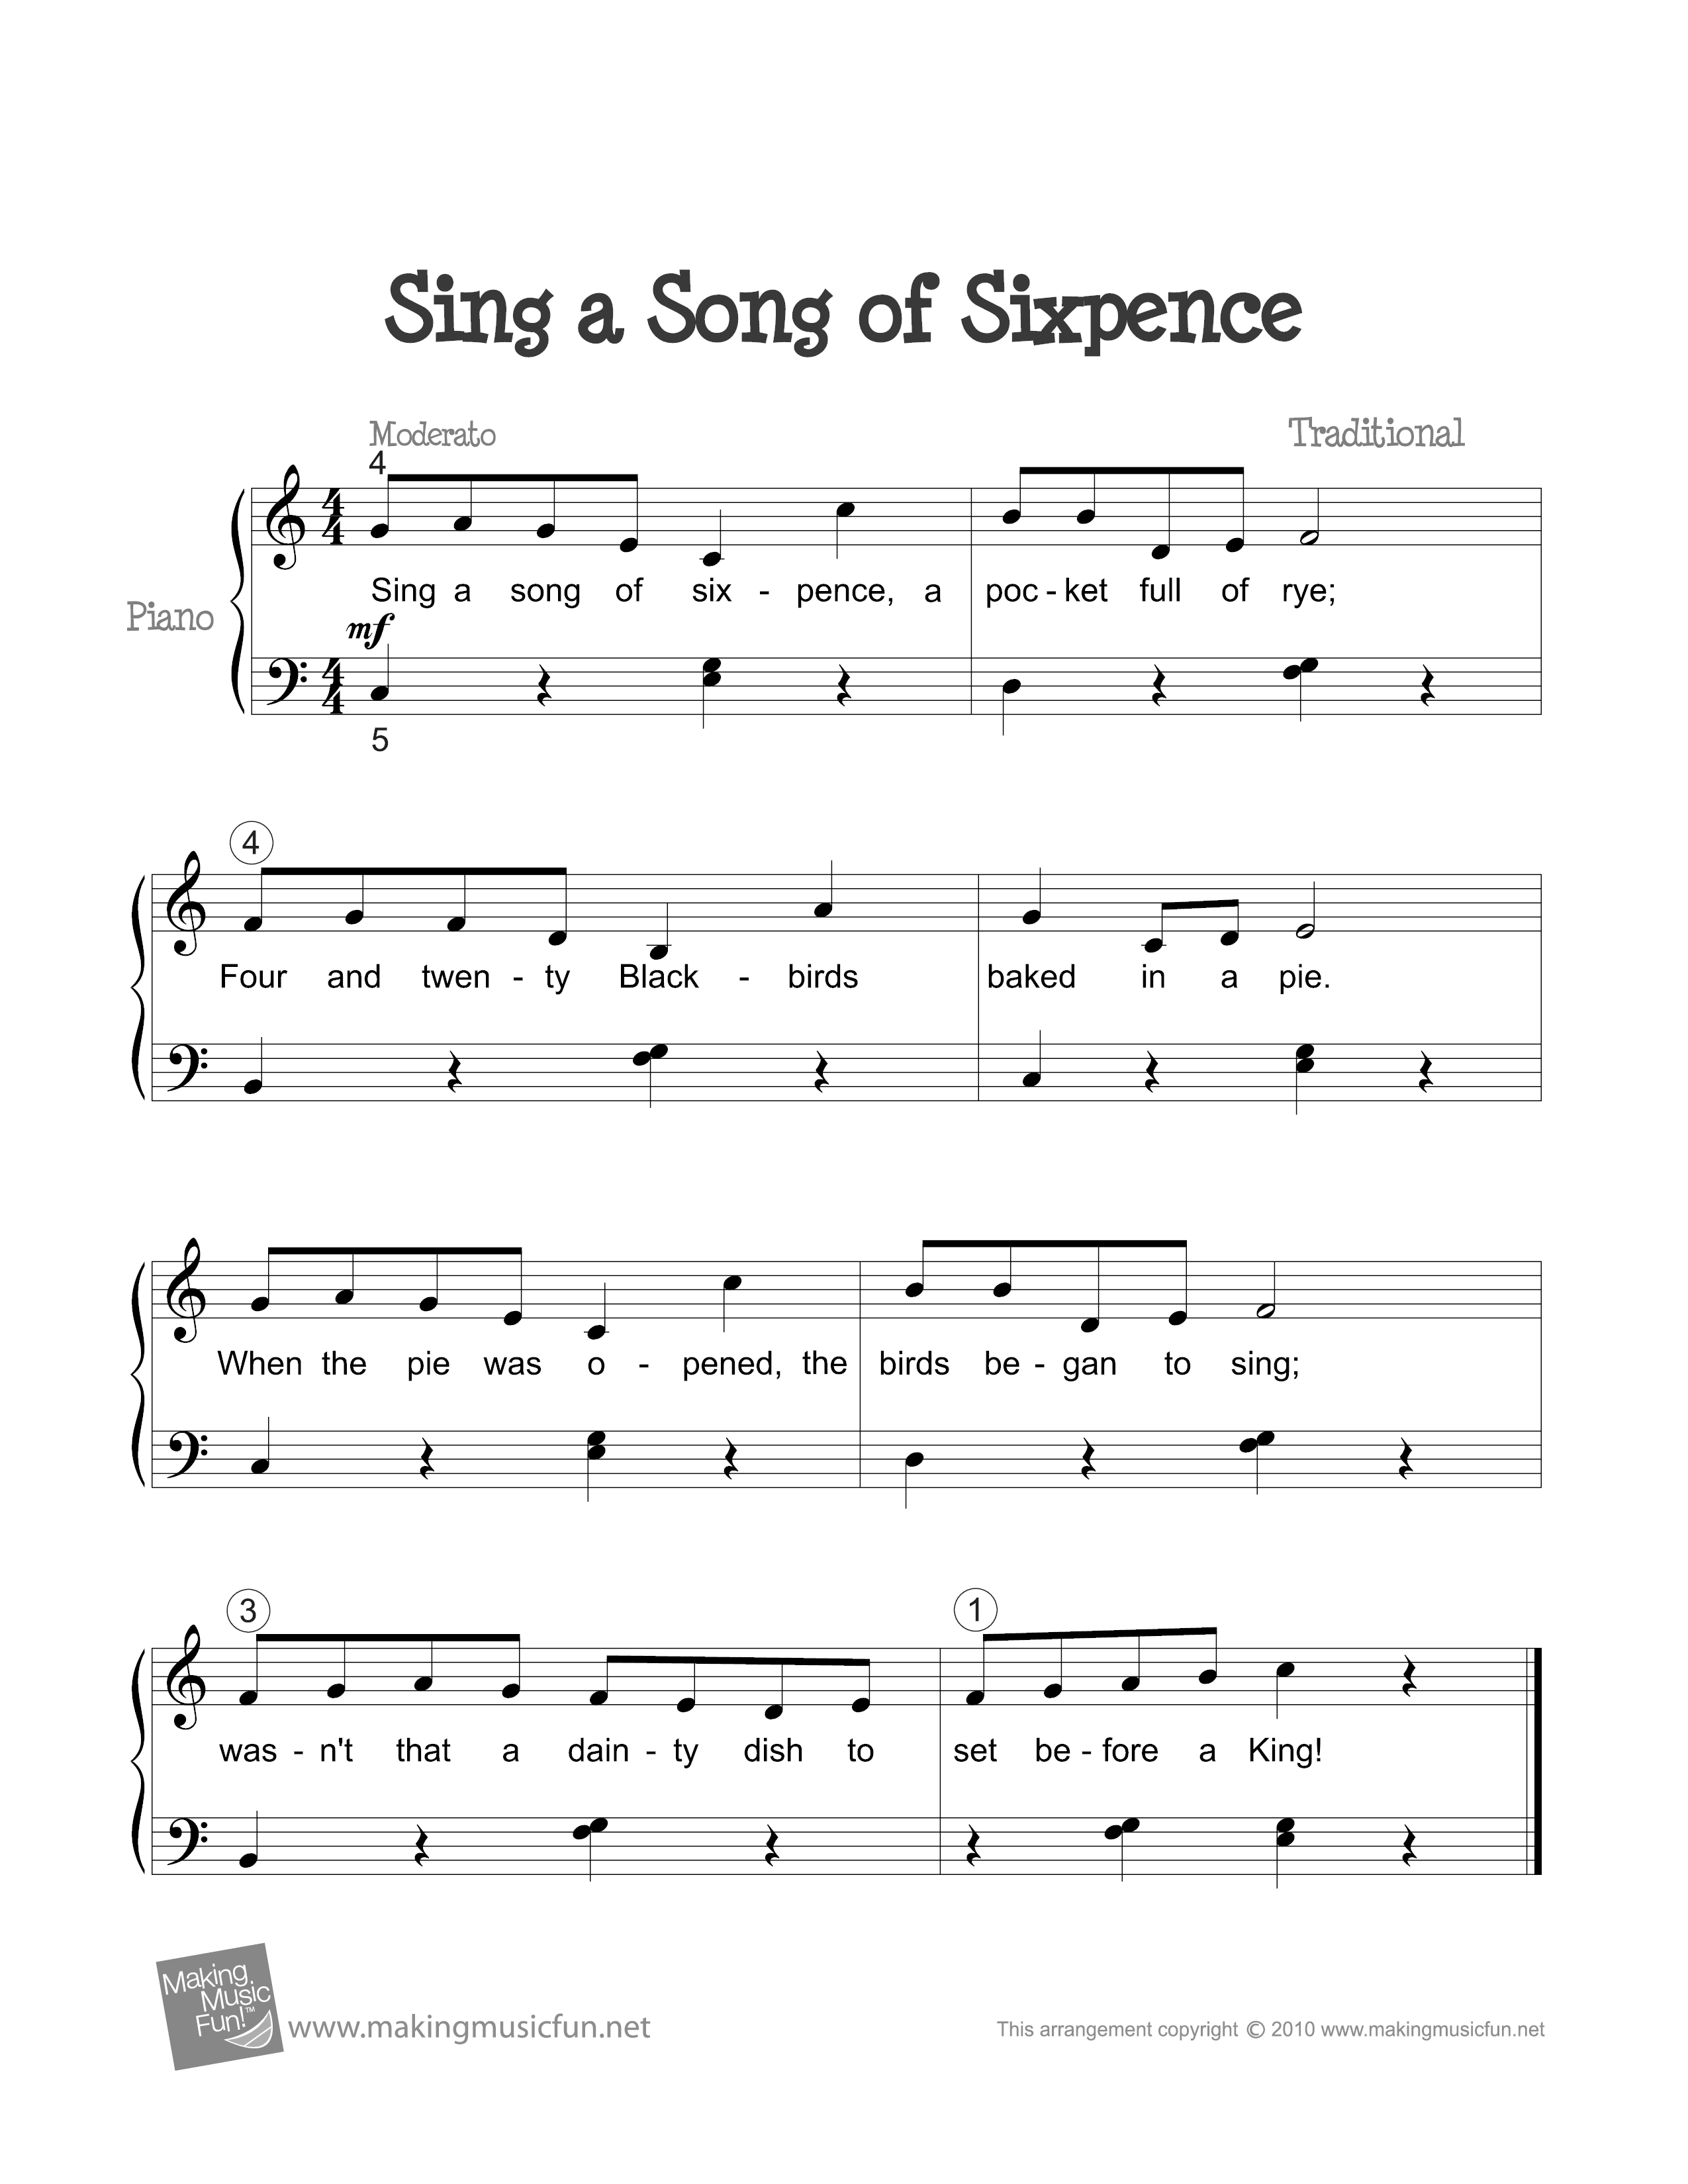 Sing a Song of Sixpenceピアノ譜